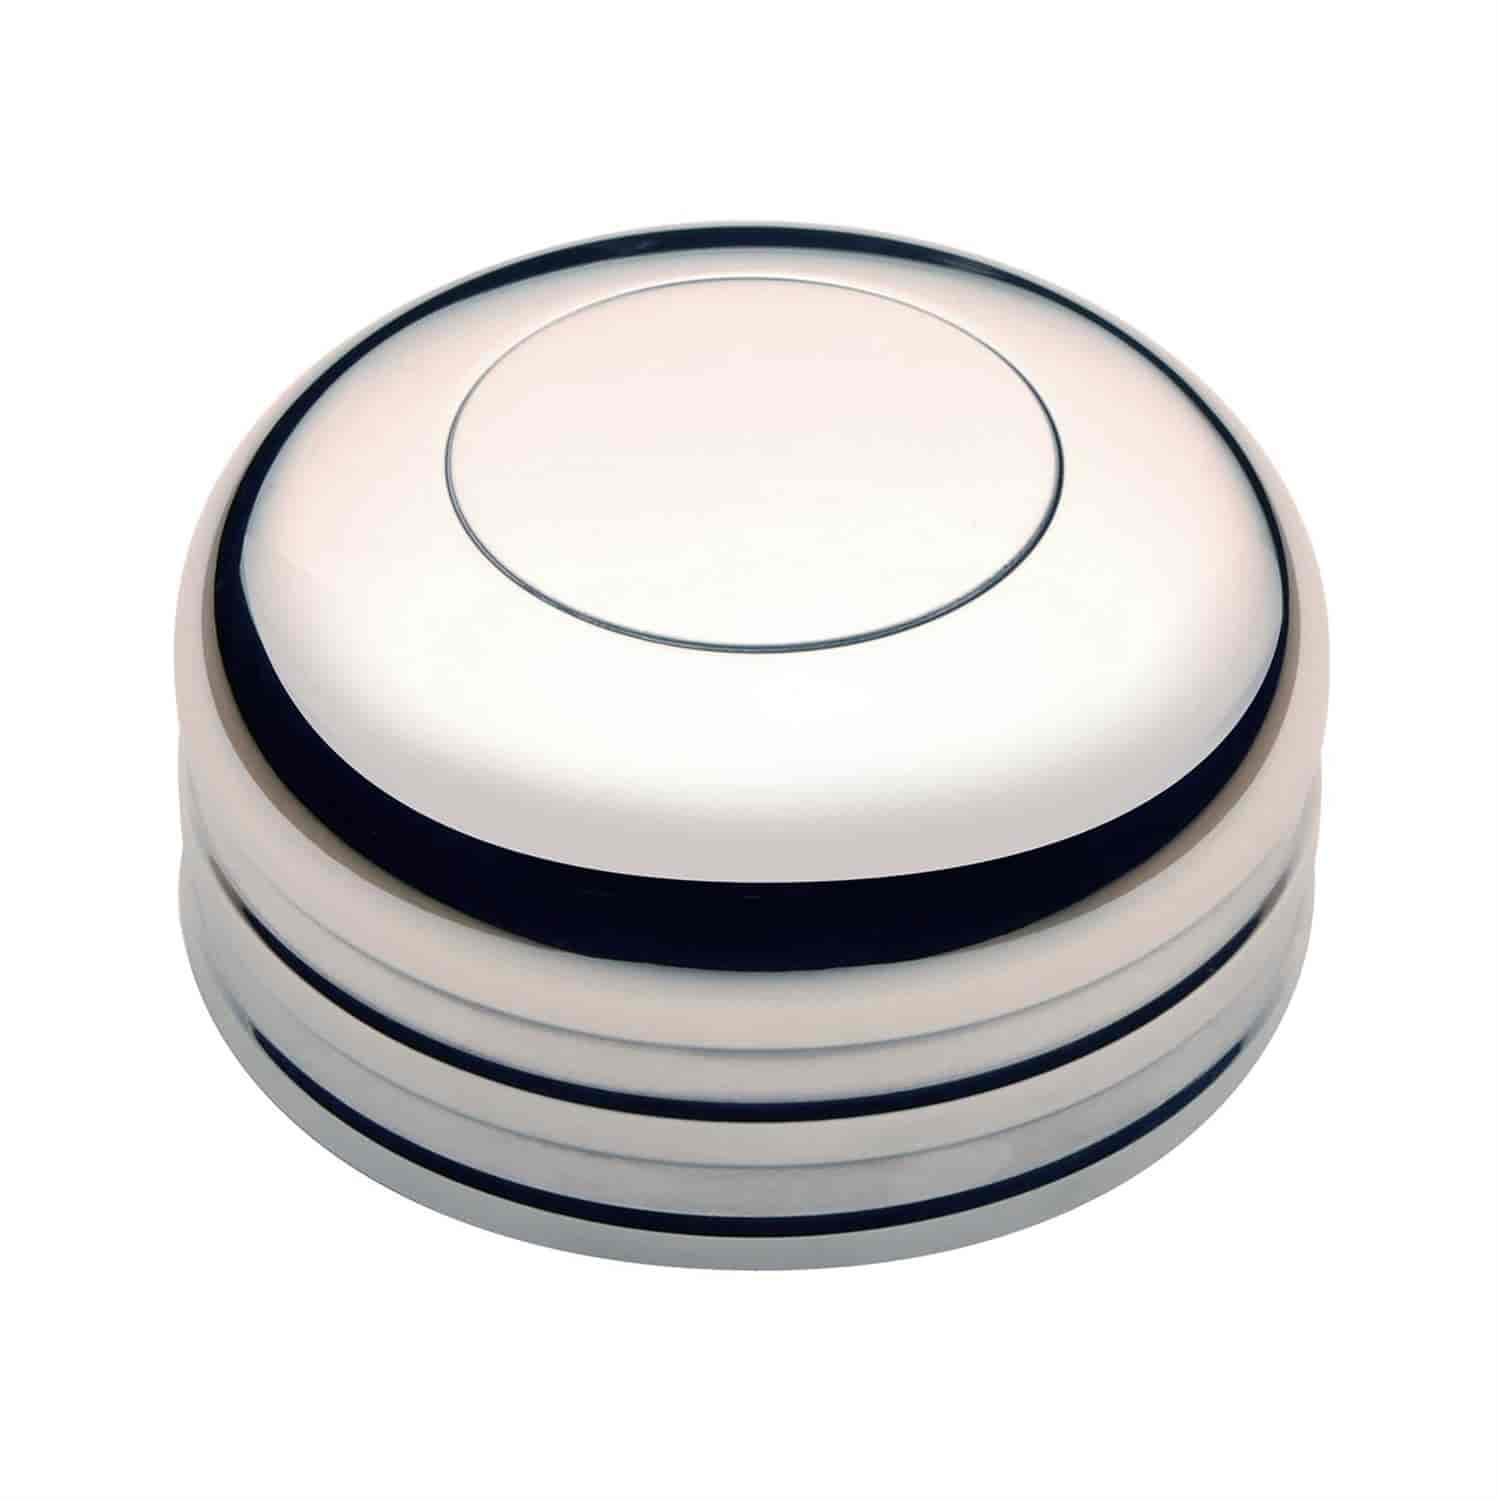 GT3 Low-Profile Horn Button w/Spacer Diameter: 3"